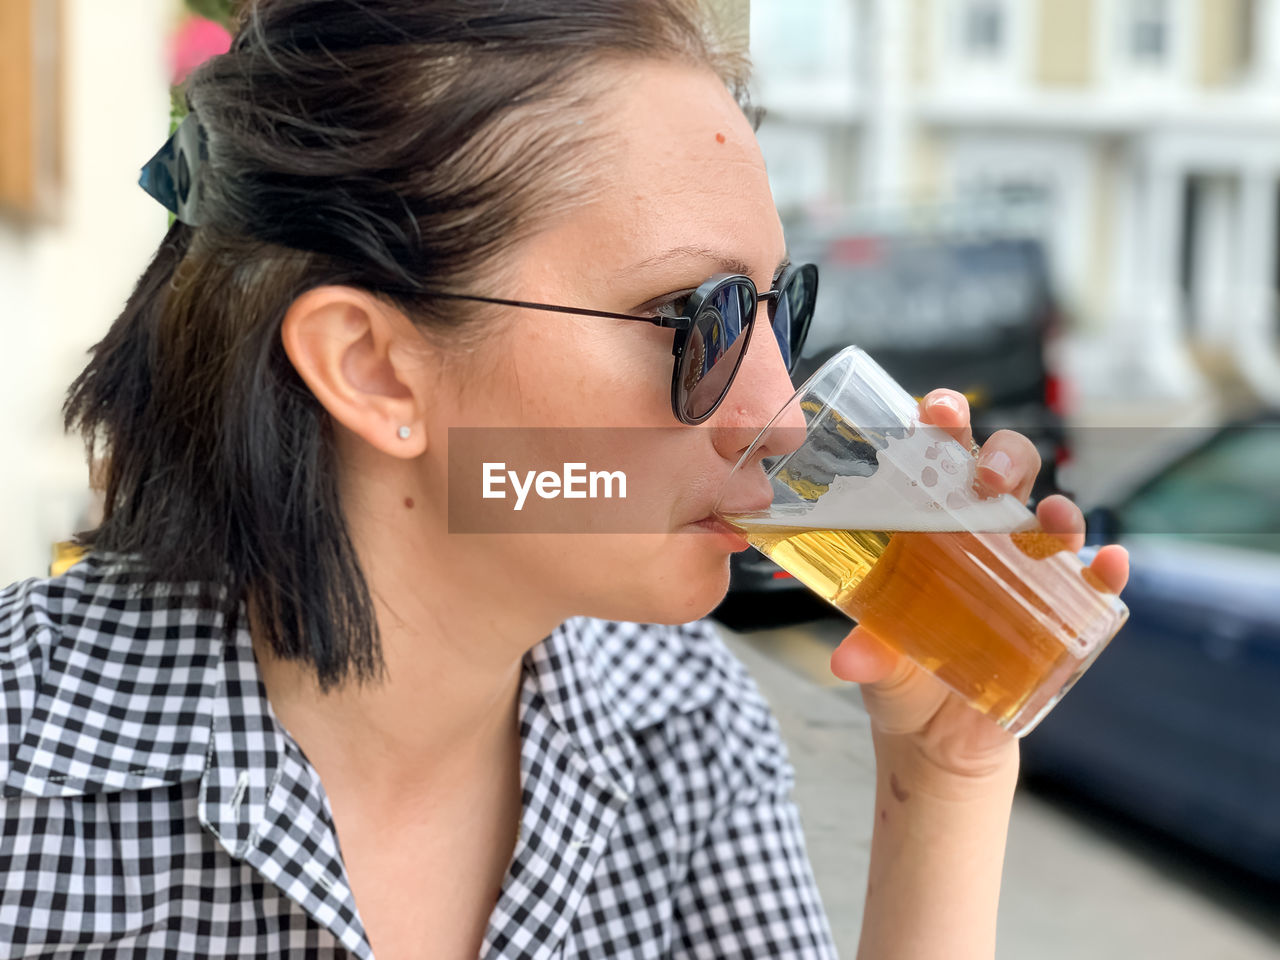 Young woman is drinking beer in a cafe or restaurant pub outdoor. drinking alcohol. candid